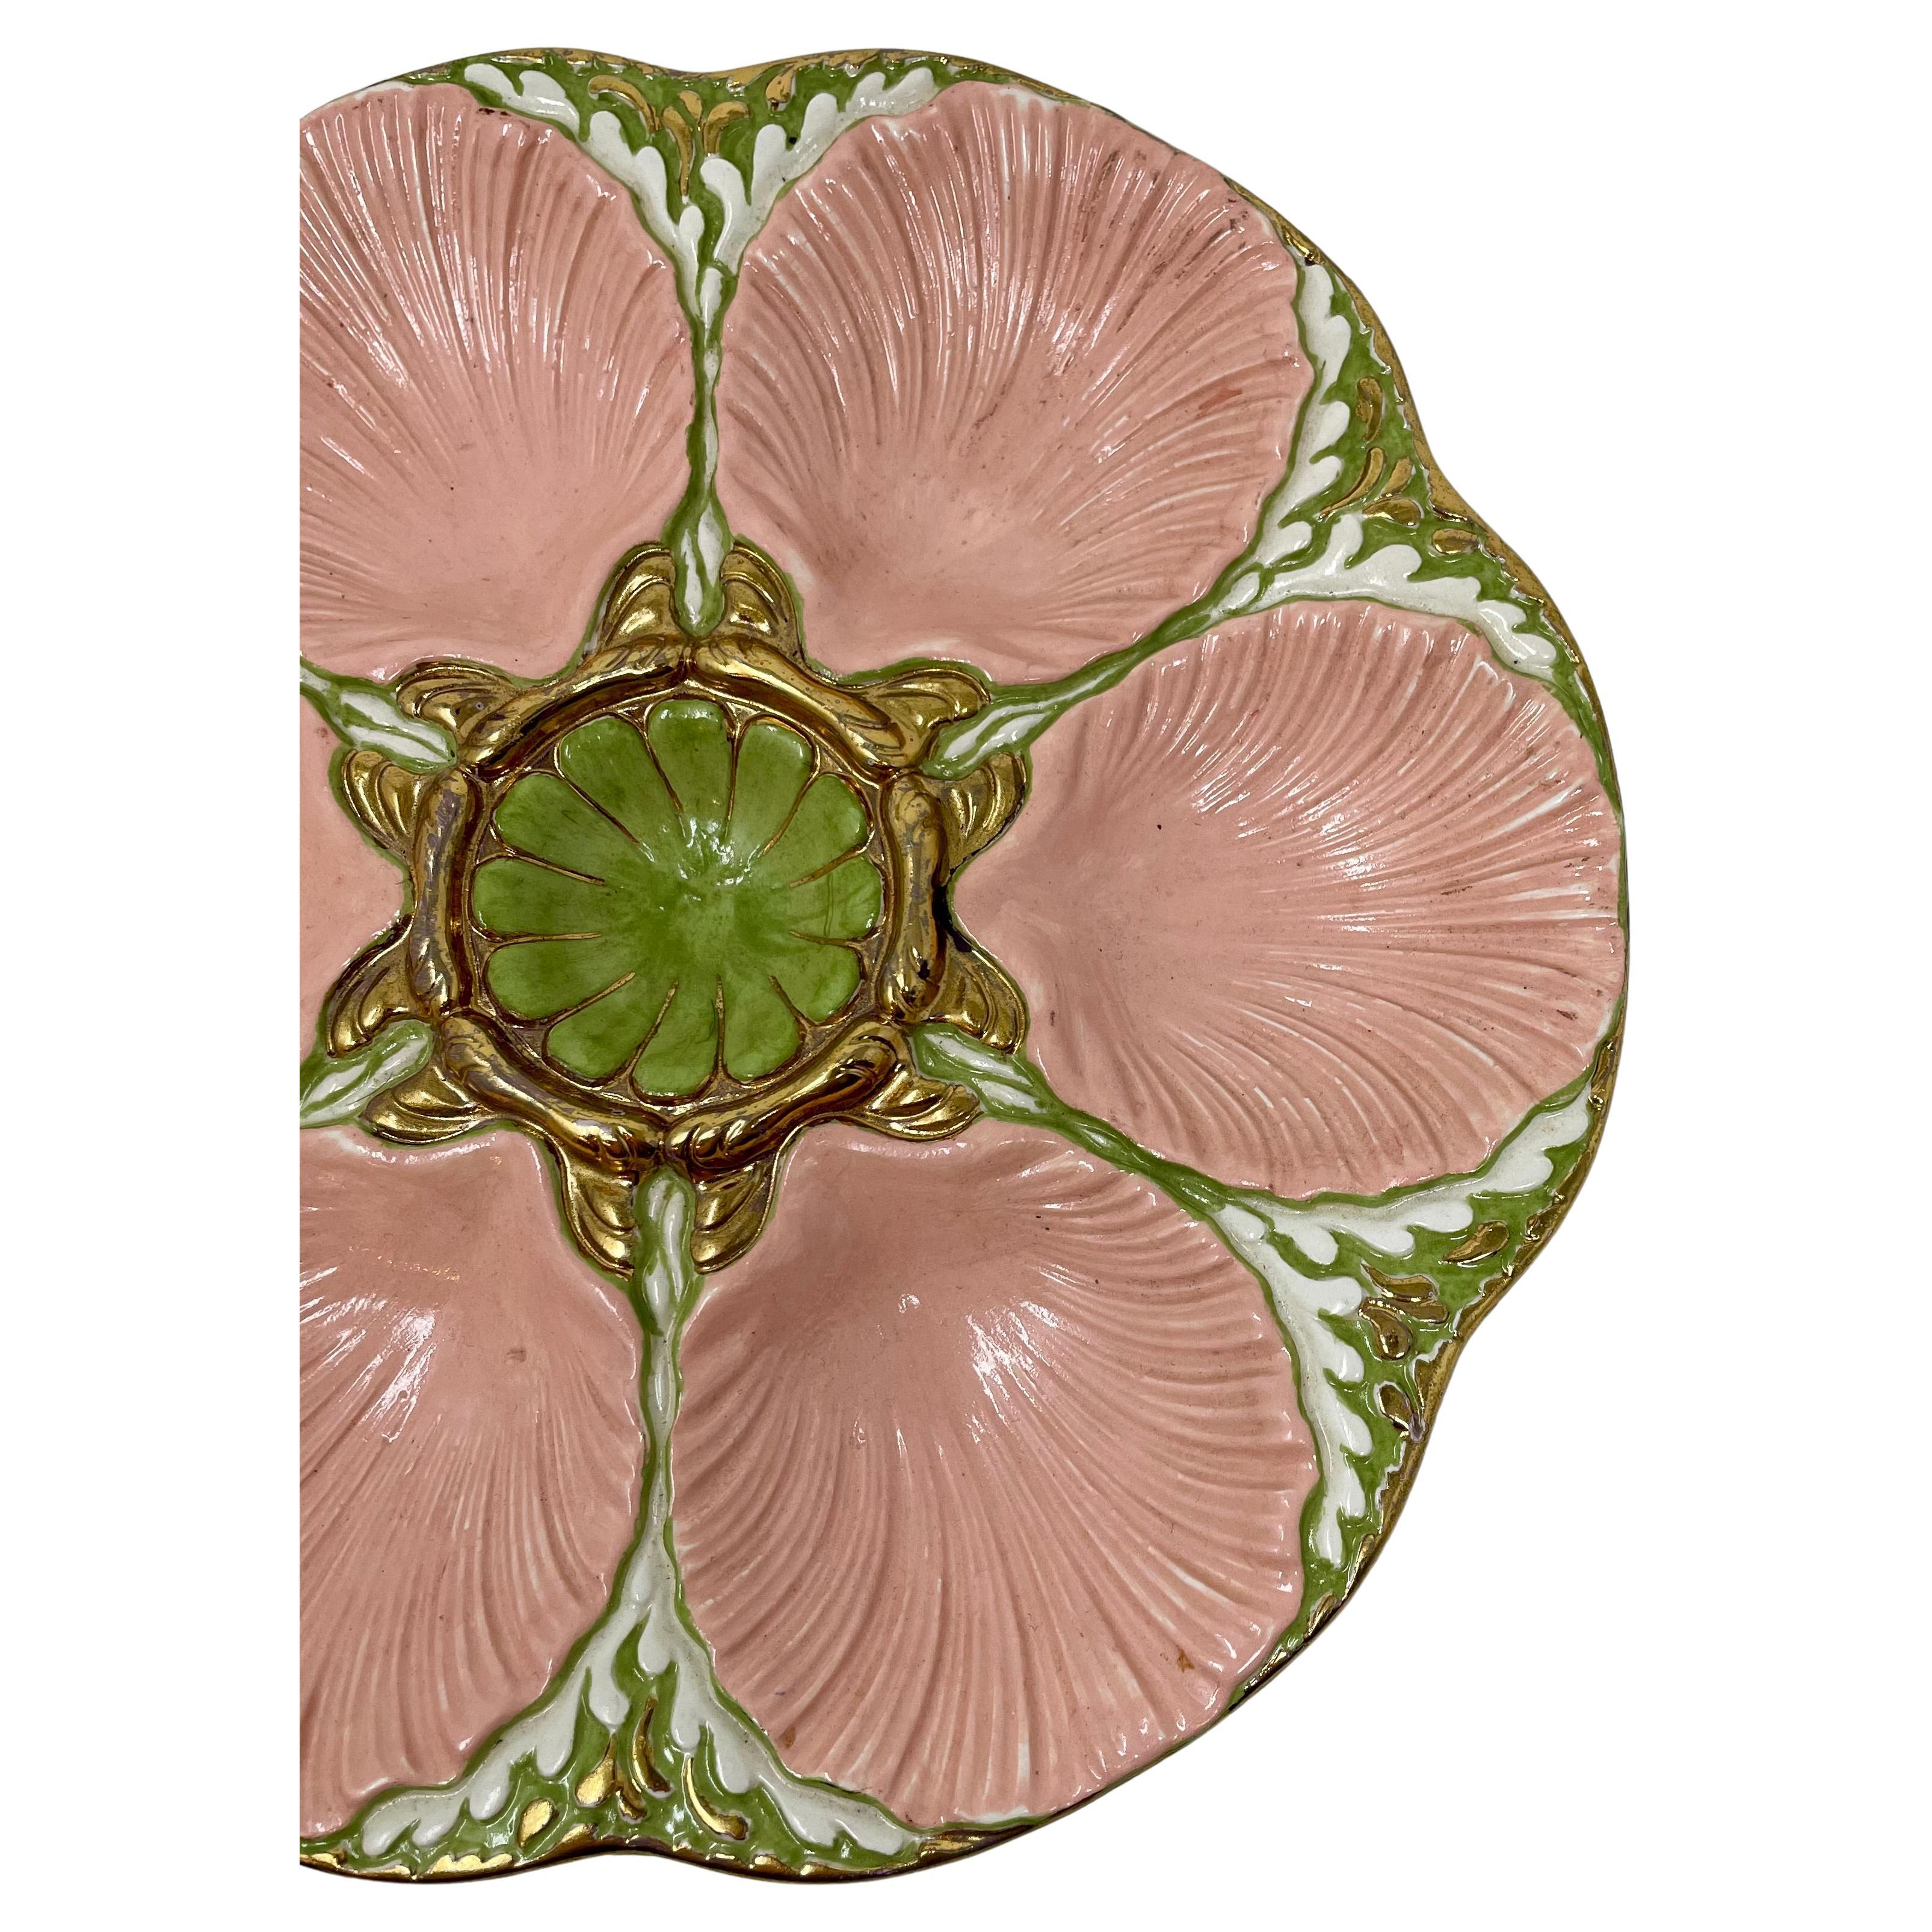 Estate Hand-Painted Ceramic Pink, Gold & Sage Green Oyster Plate, Circa 1940-1950.